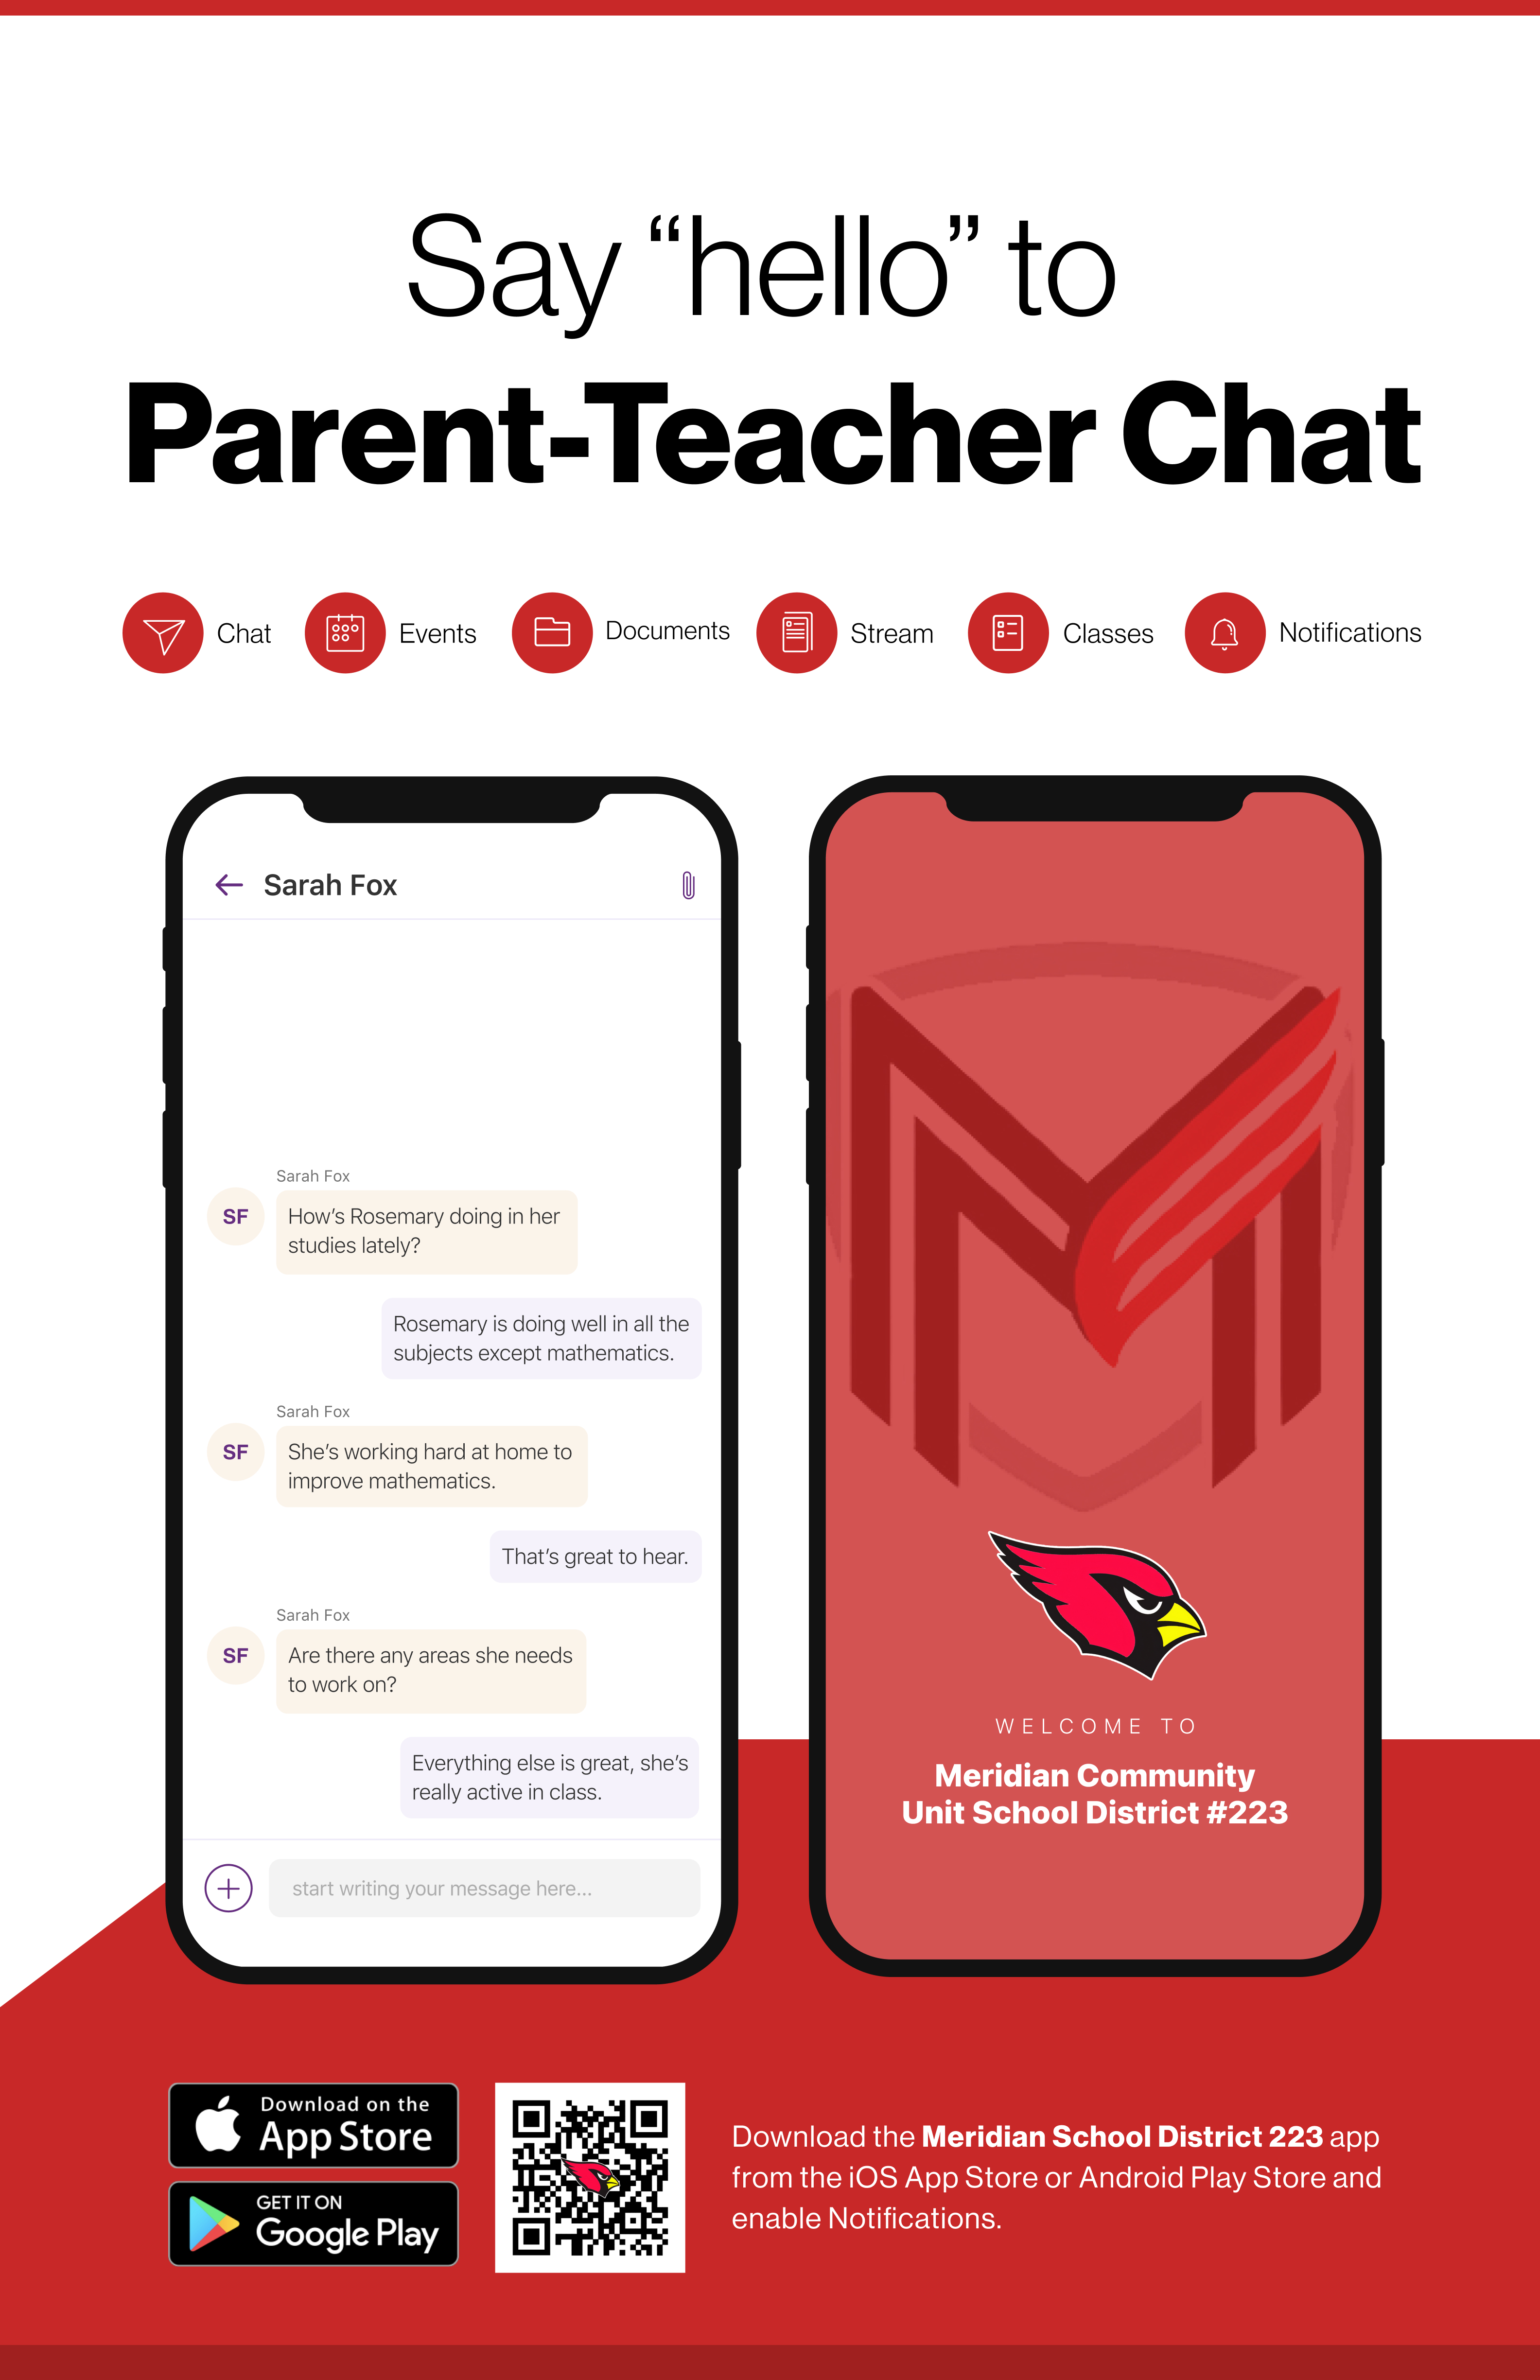 Say hello to Parent-Teacher chat in the new Rooms app. Download the Meridian Community Unit School District #223 app in the Google Play or Apple App store.